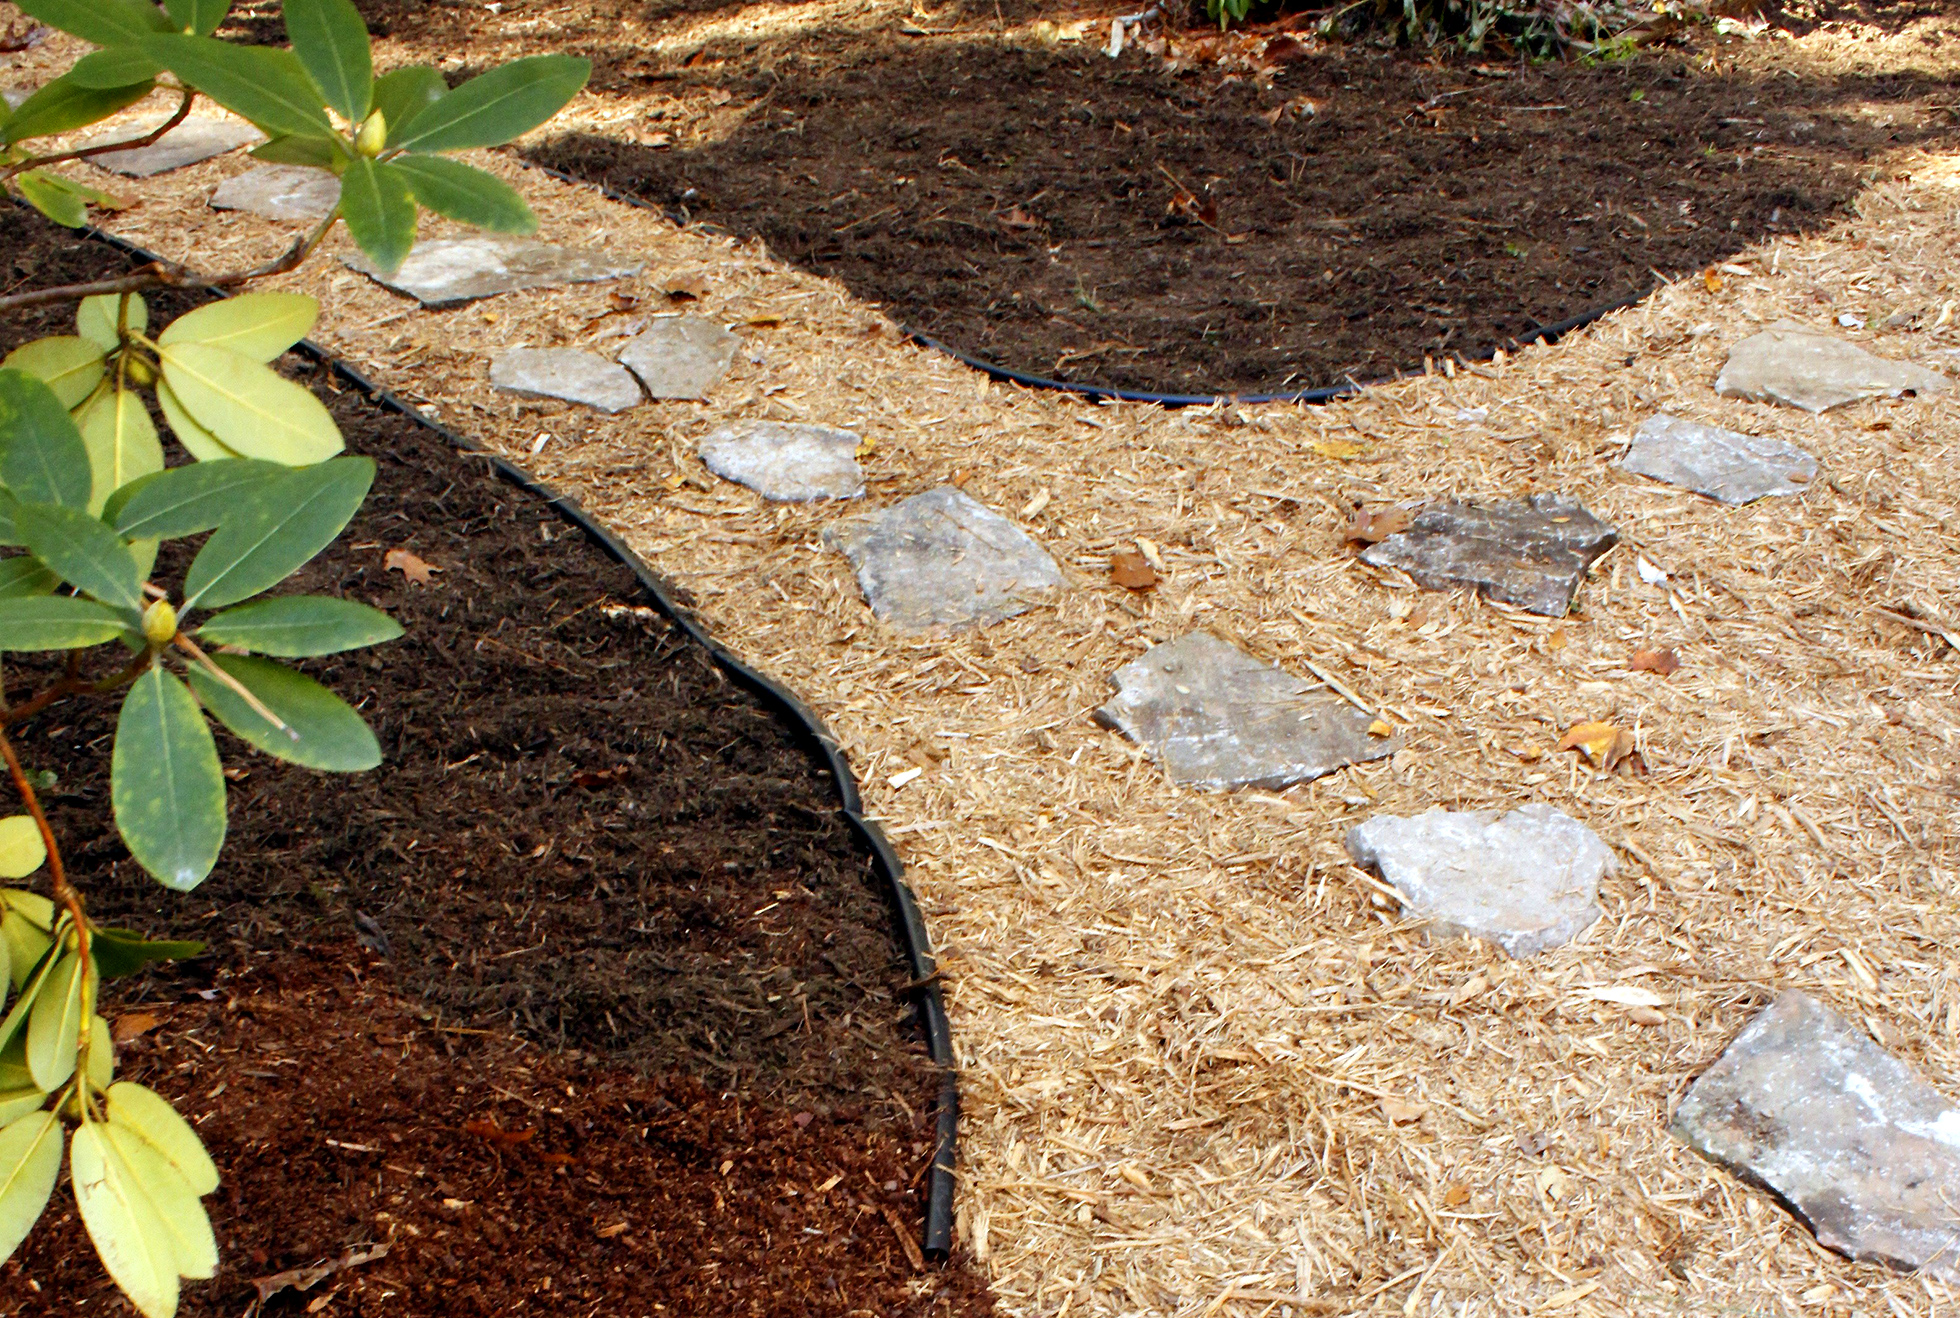 A bed of light and dark mulch with a stone path through it